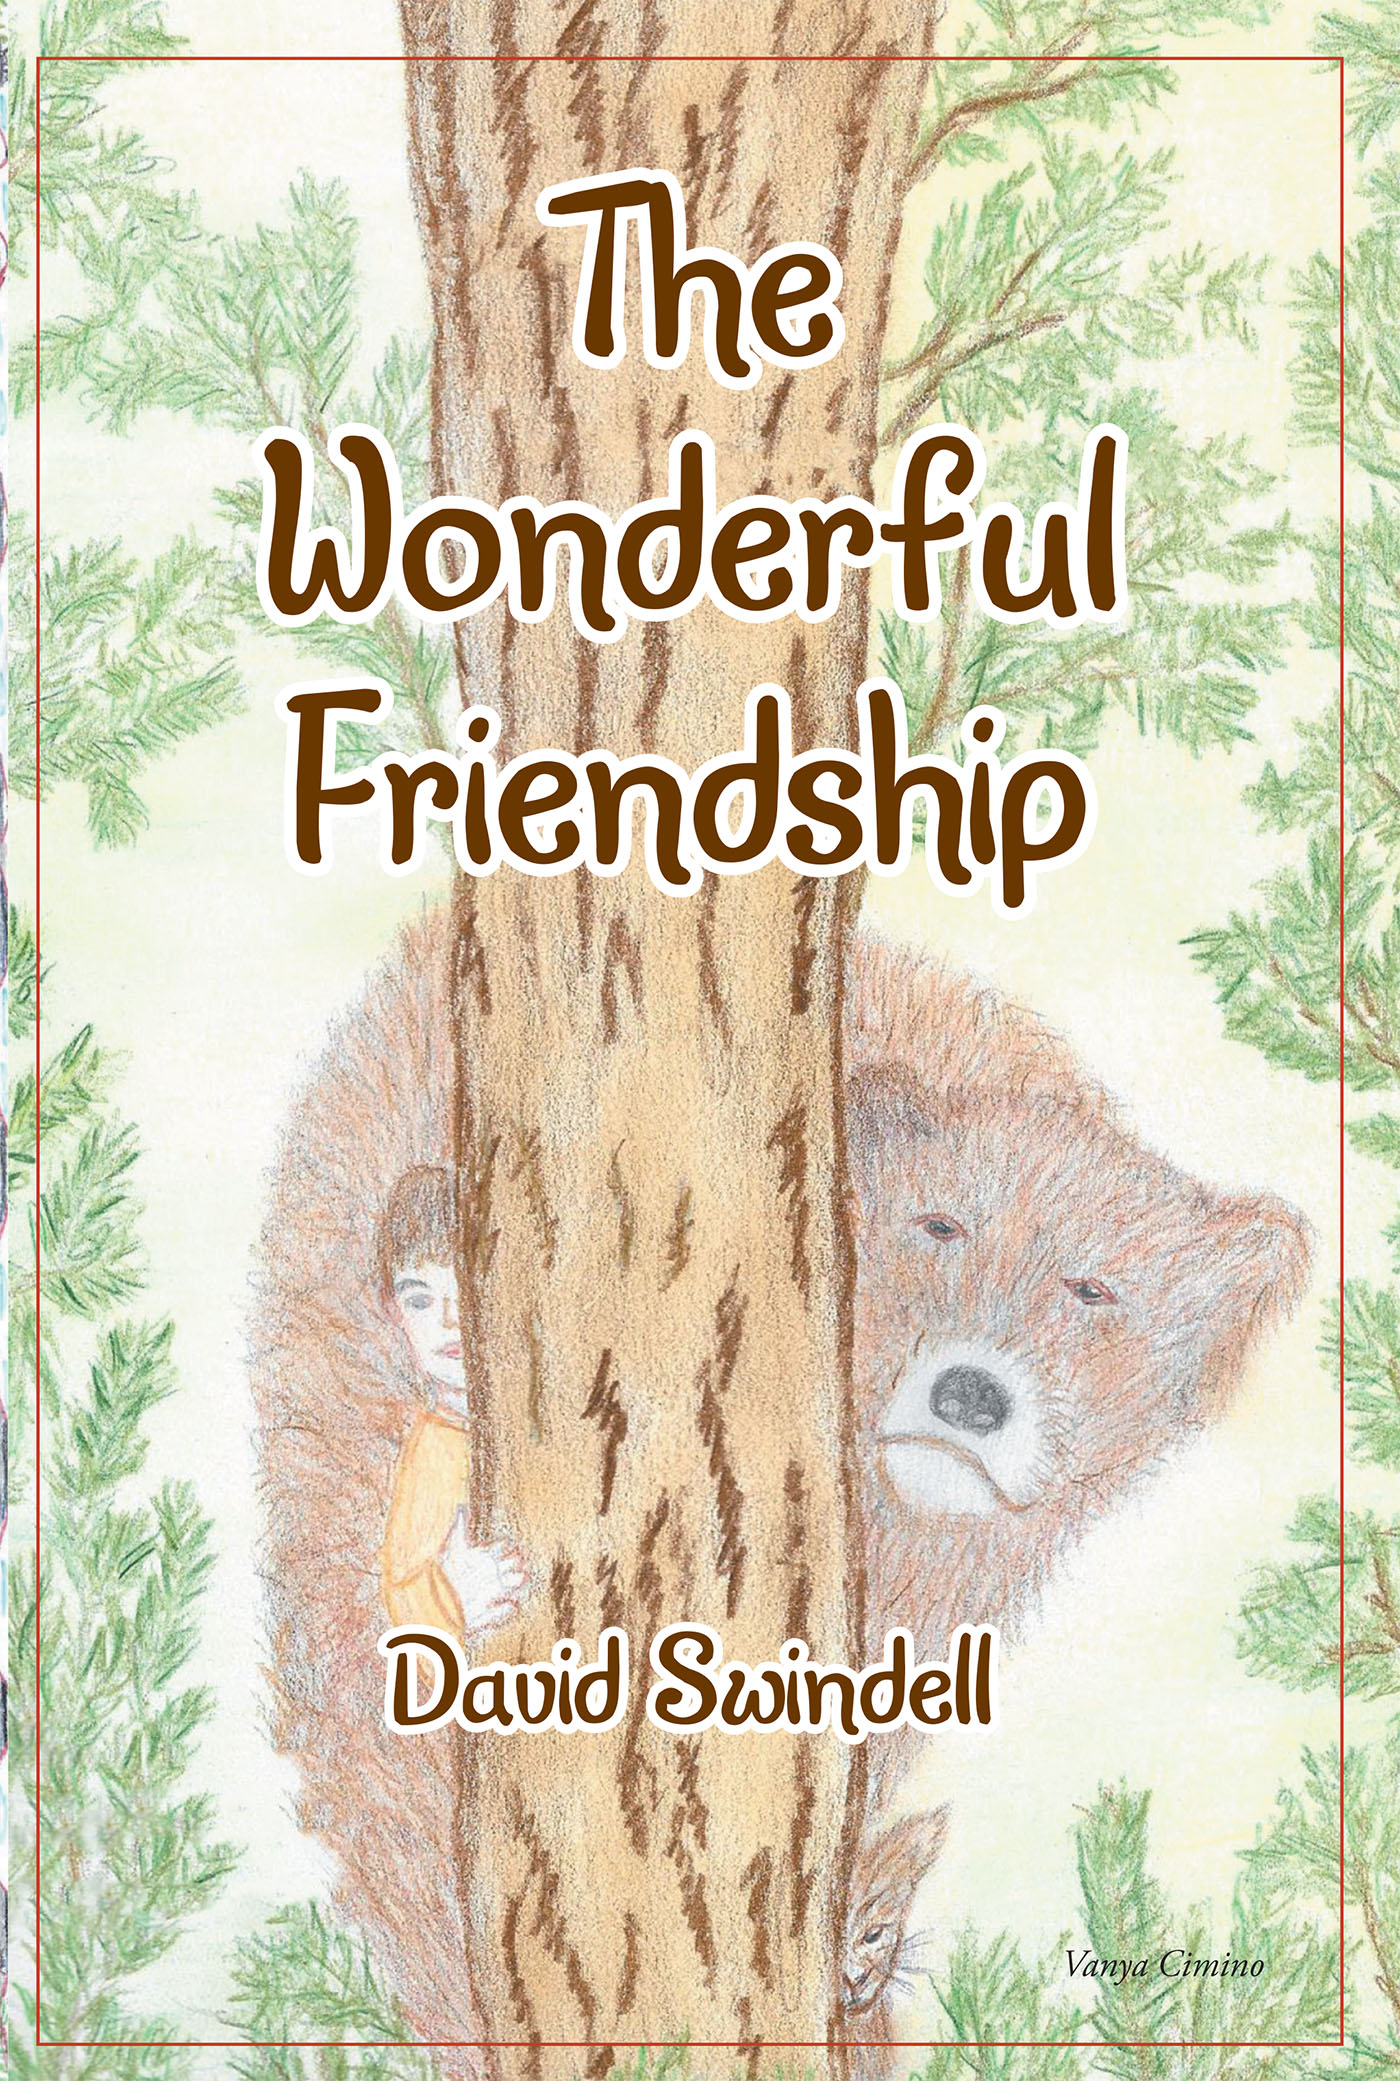 David Swindell’s Newly Released "The Wonderful Friendship" is a Heartwarming Adventure That Finds Unexpected Friendships Evolve Through an Intriguing Journey